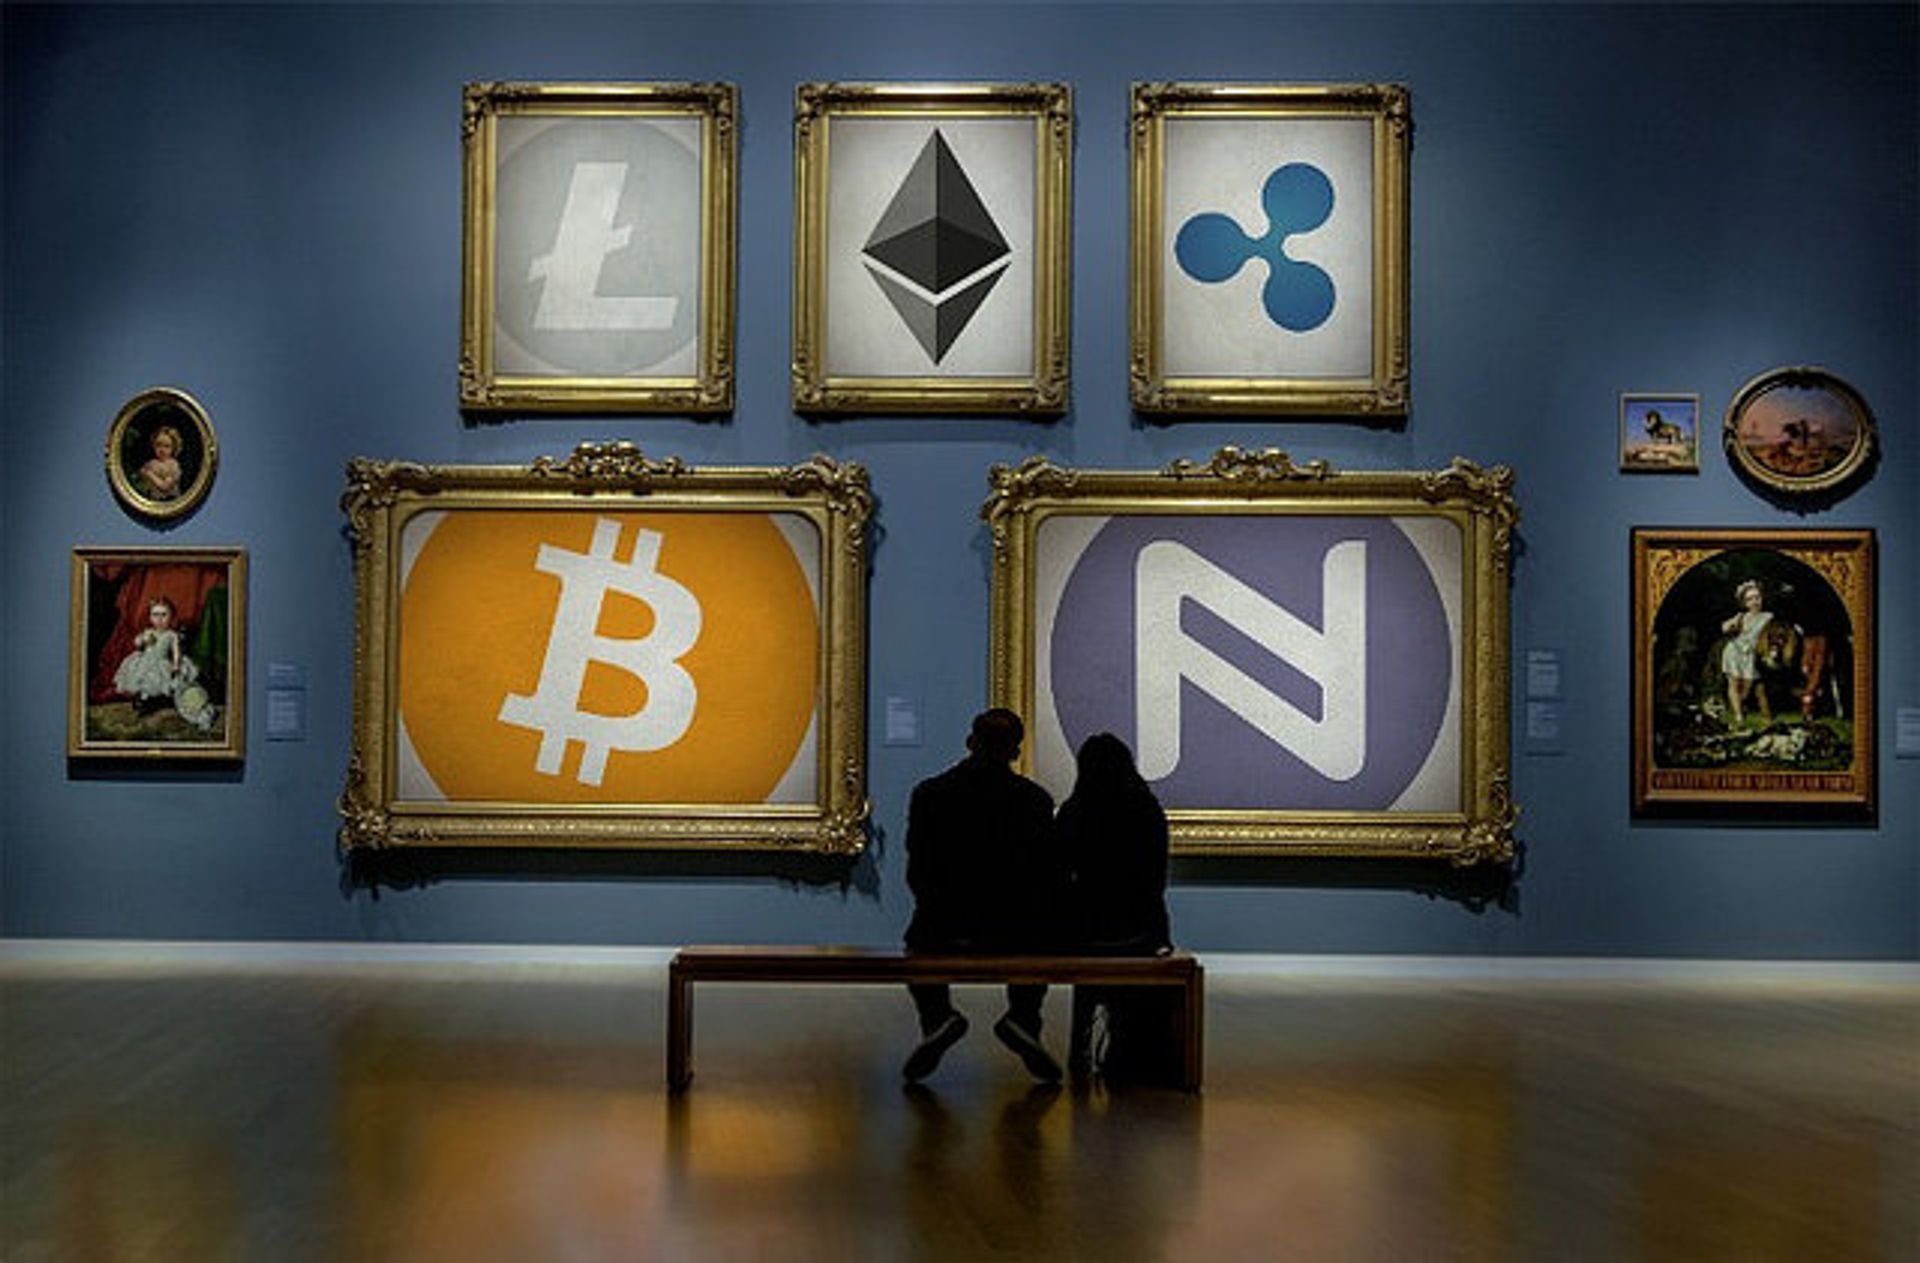 The start-up firm Artory uses blockchain, the tech behind cryptocurrencies, to verify sale and provenance information about works of art and collectibles. Courtesy of Namecoin